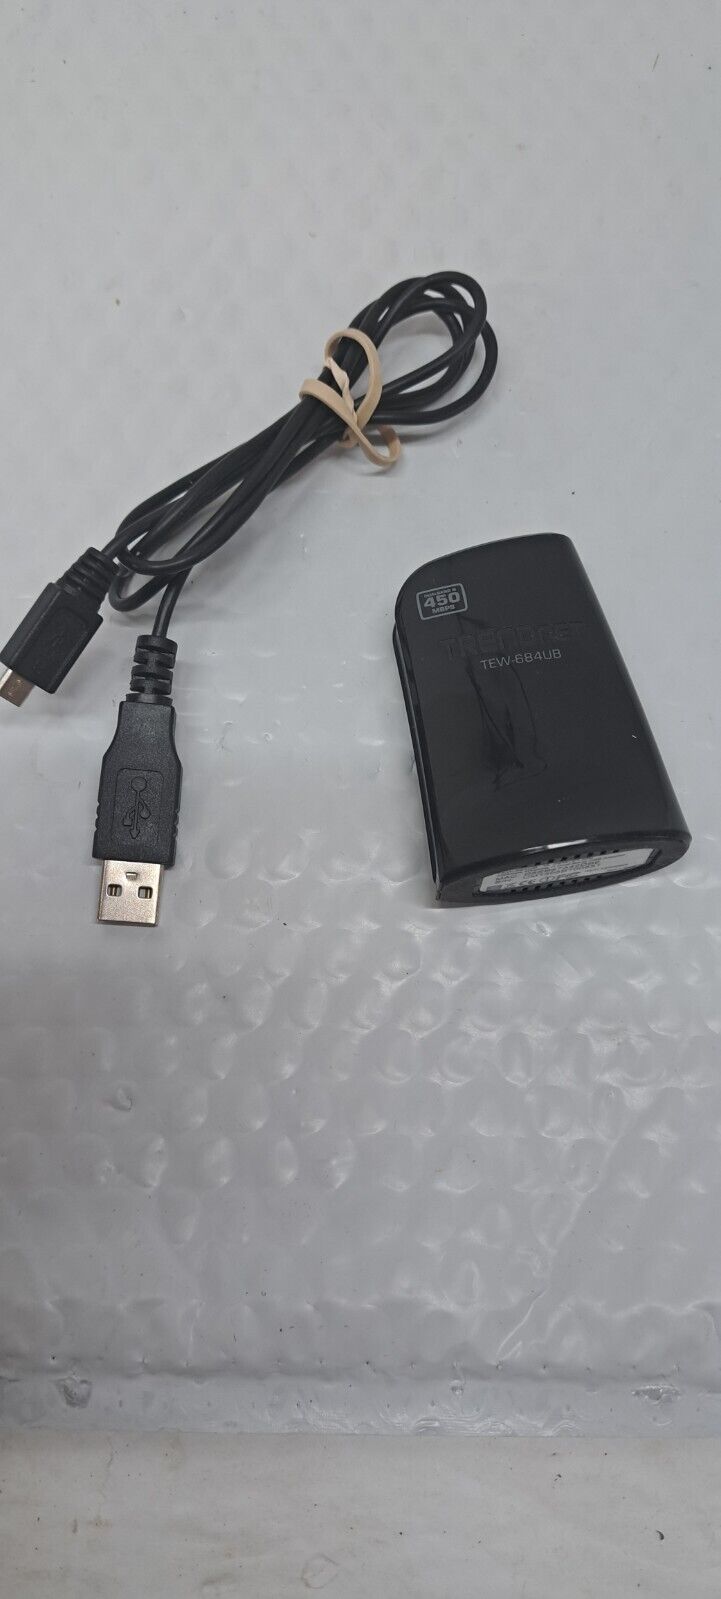 trendnet TEW-684UB 450MBPS WIRELESS AND DUAL BAND ADAPTER